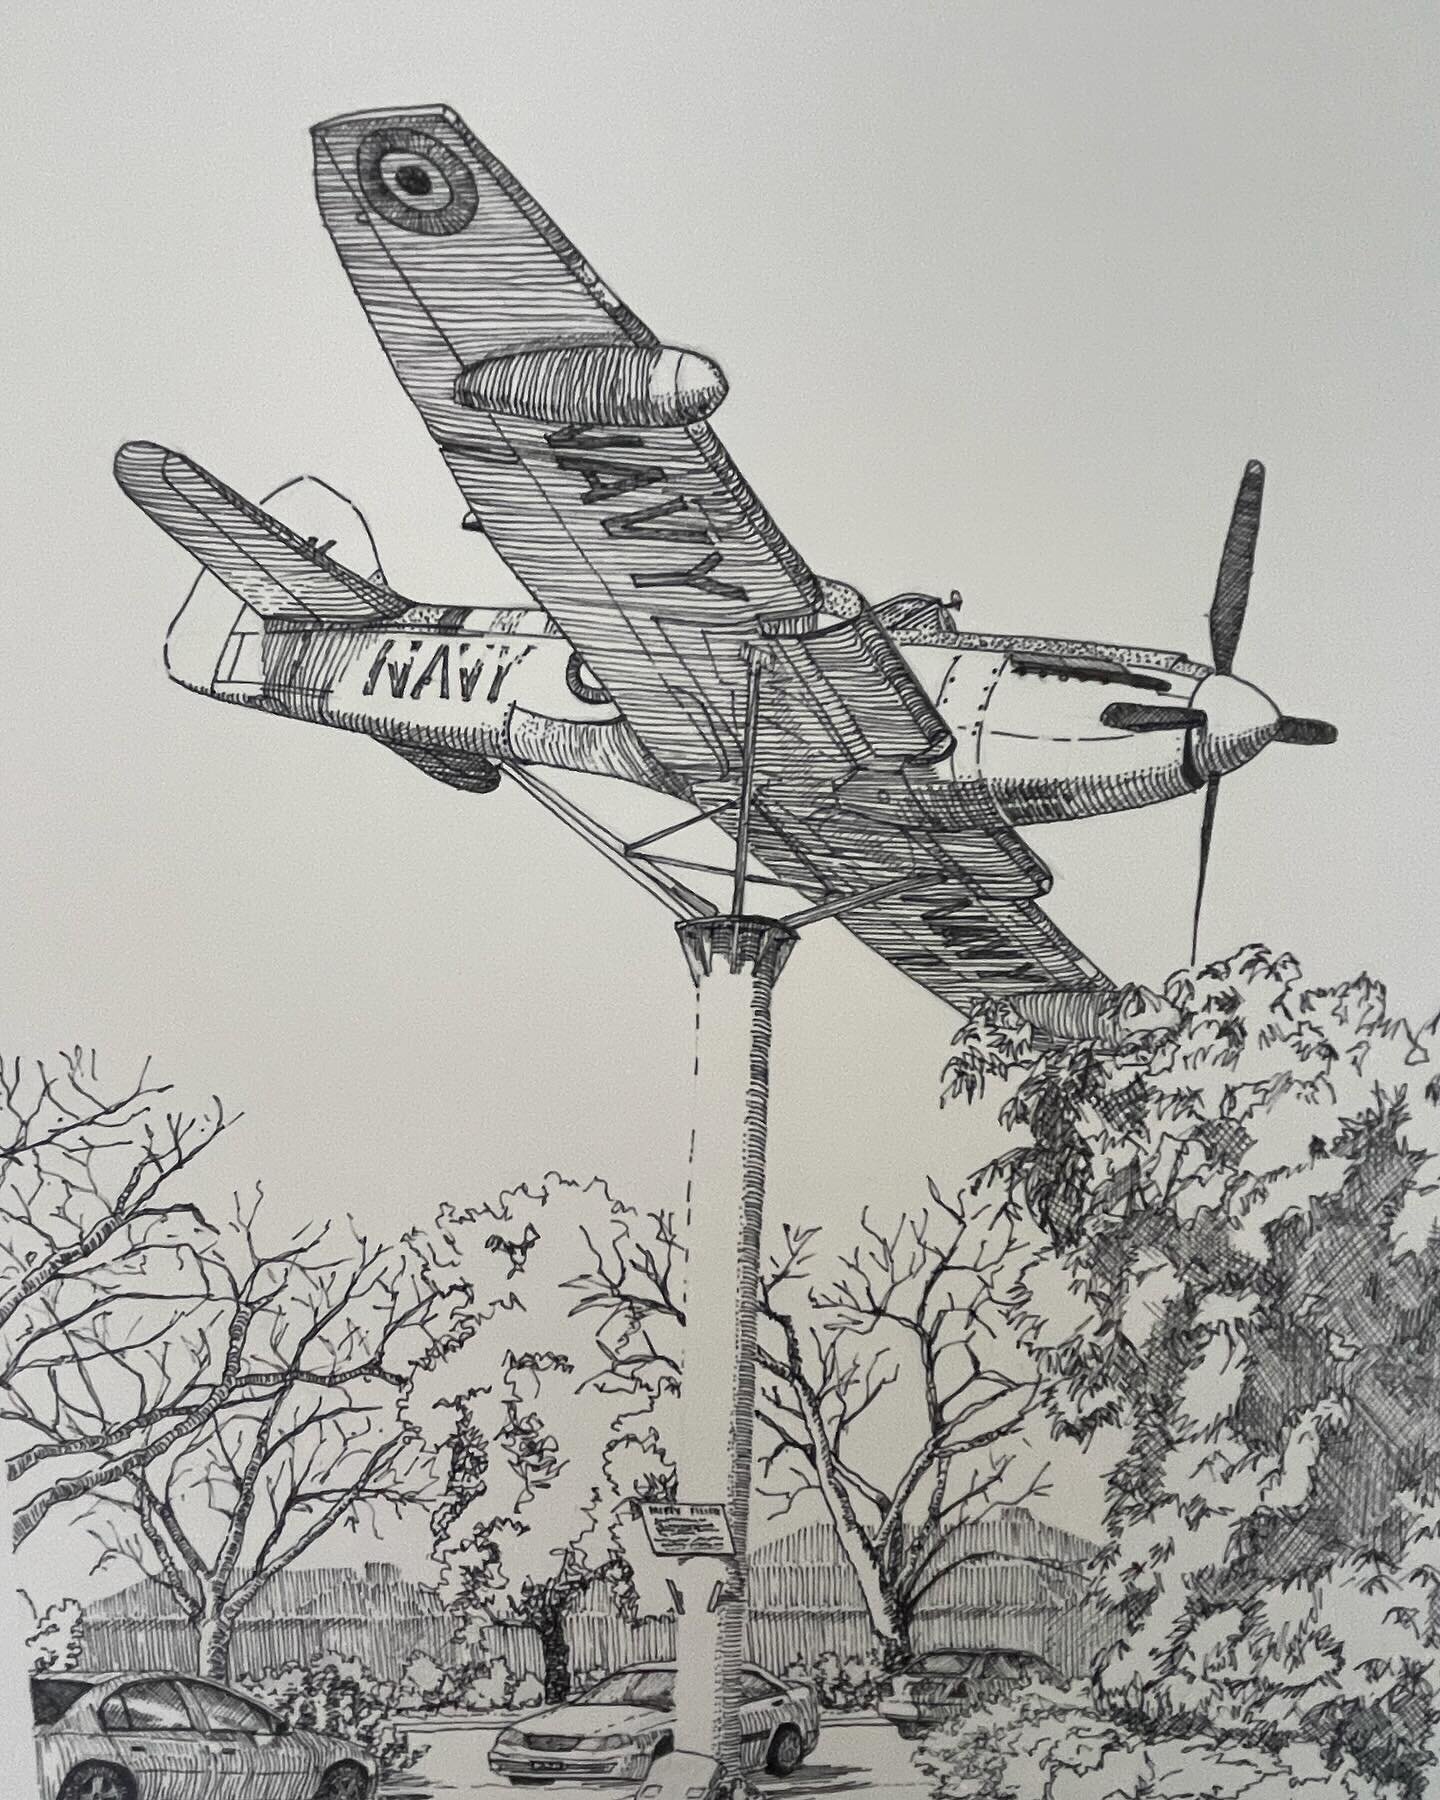 I&rsquo;m currently doing some architectural drawings, which I am enjoying very much. It&rsquo;s a very mindful experience.

Located at the Griffith Tourism Hub, the Fairey Firefly Fighter Bomber was raised as a memorial to all the men and women of t